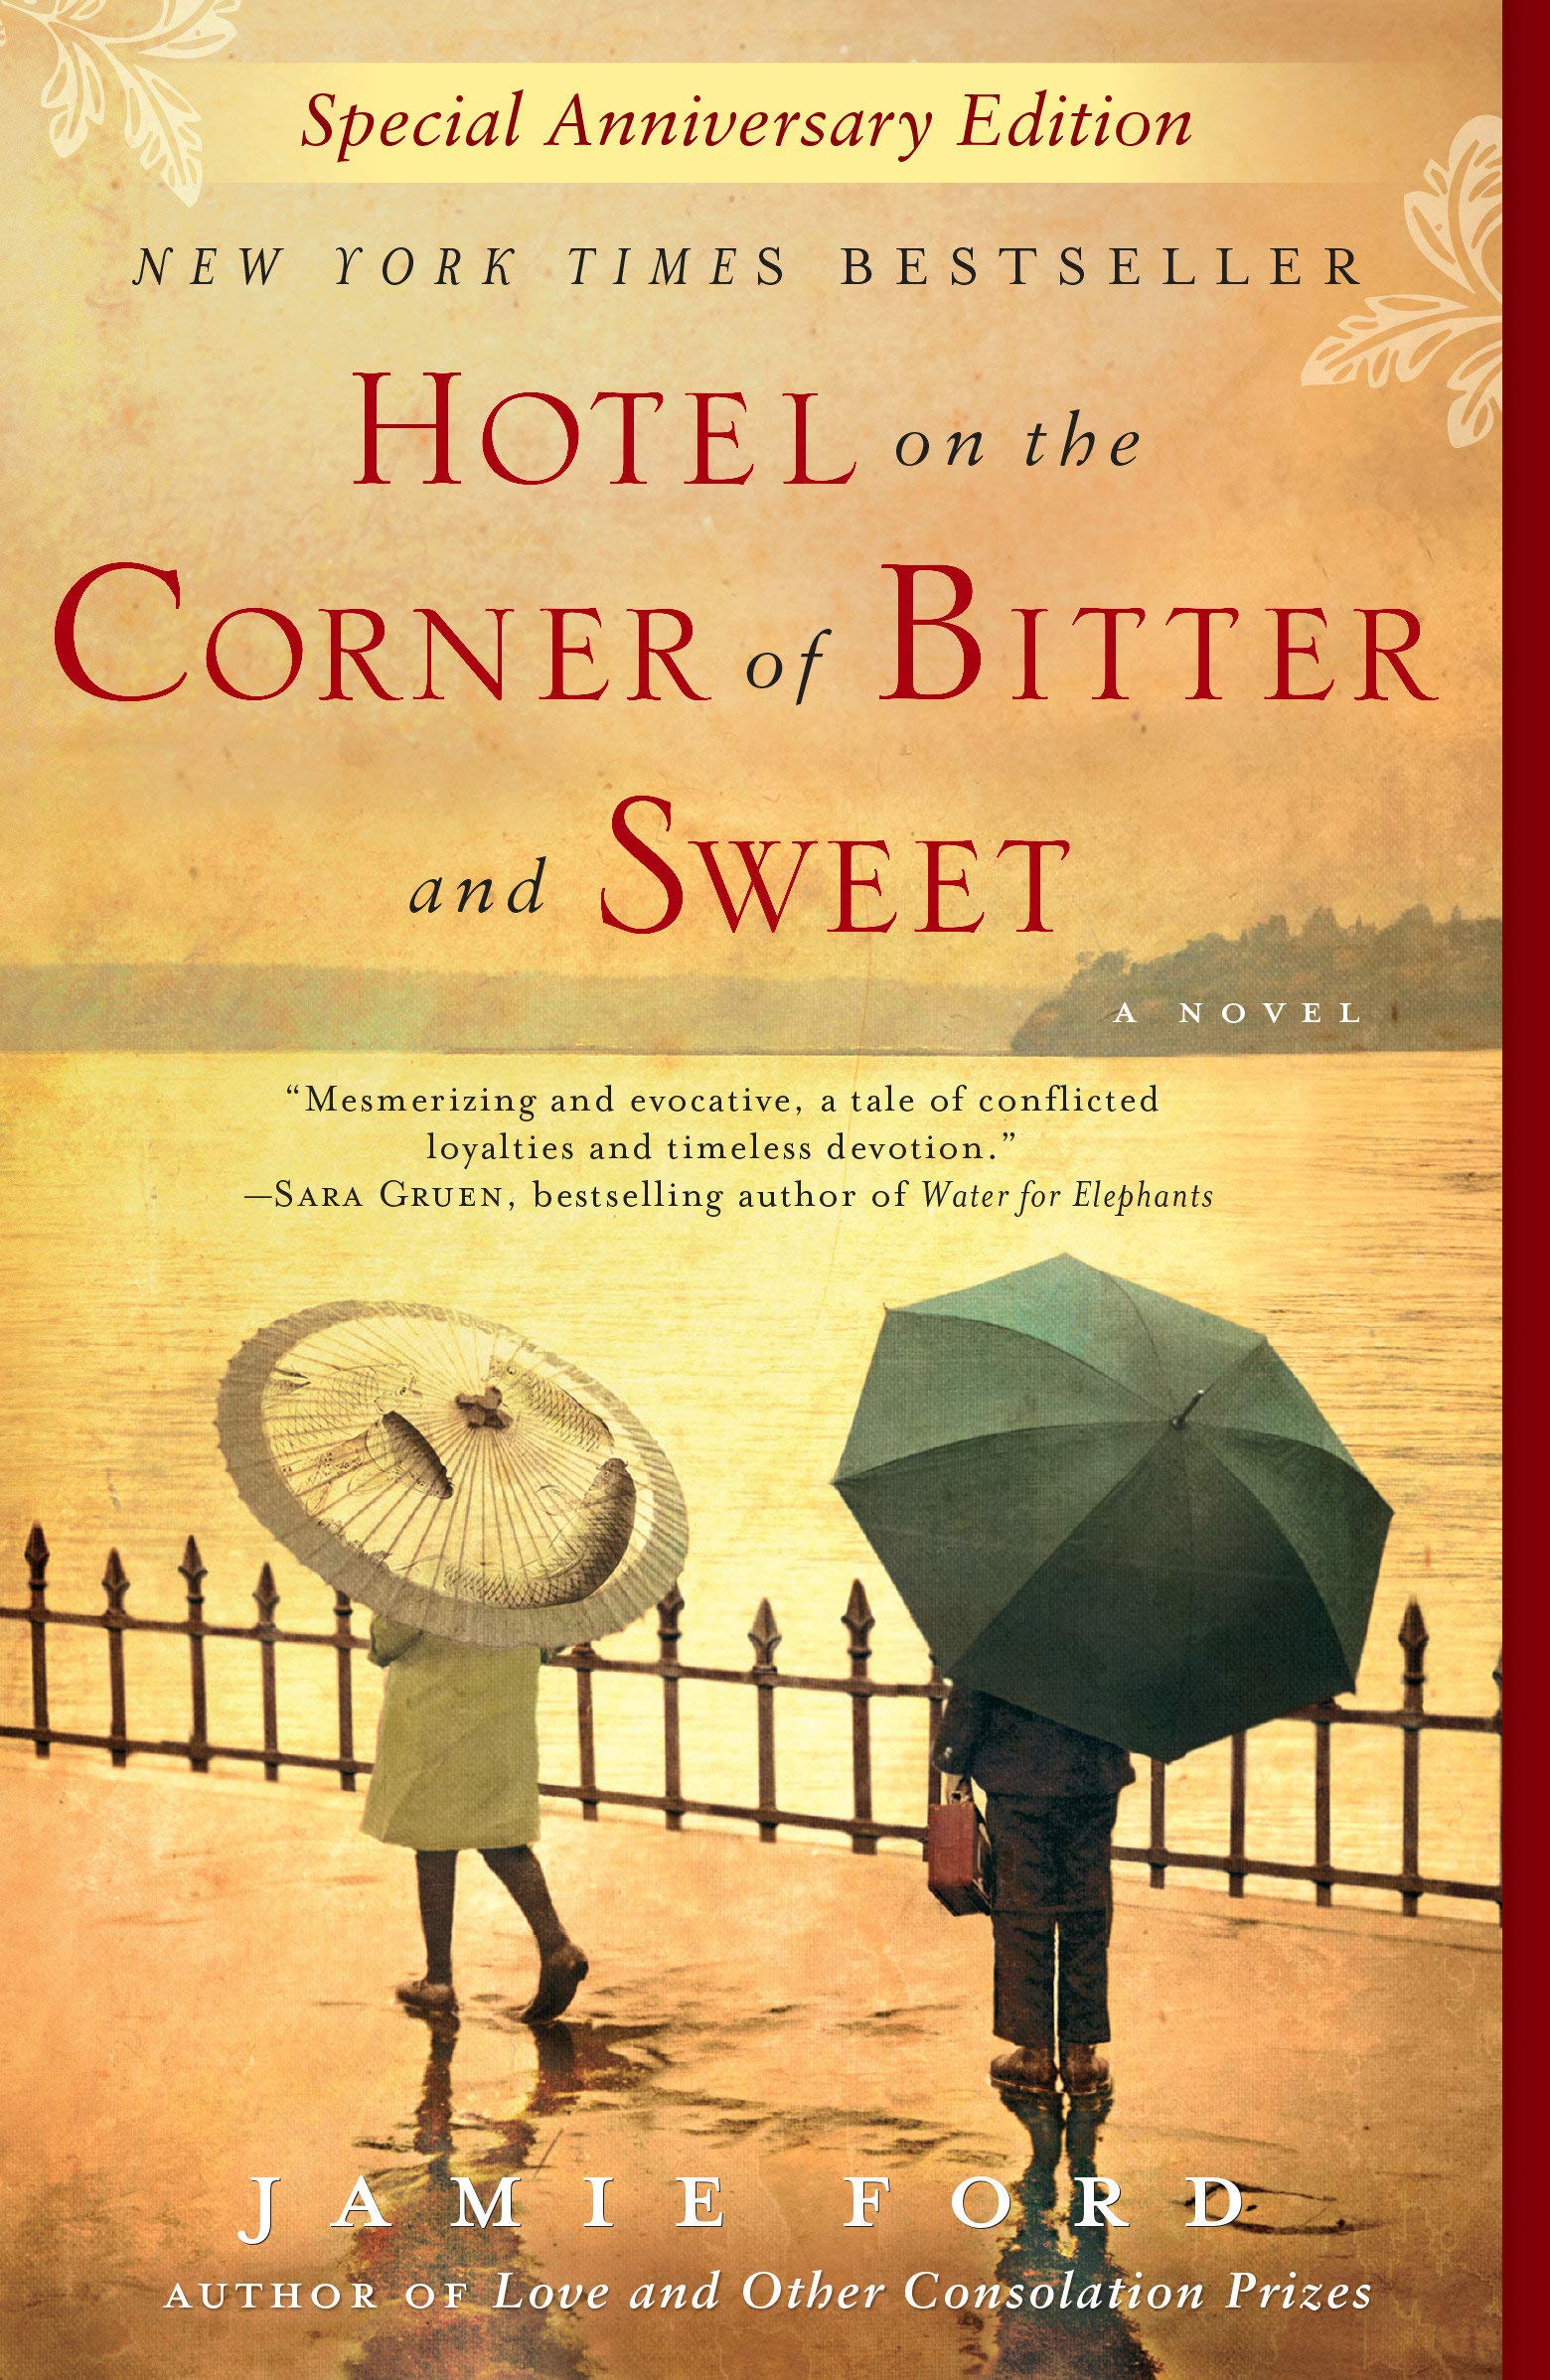 Image for "Hotel on the Corner of Bitter and Sweet|